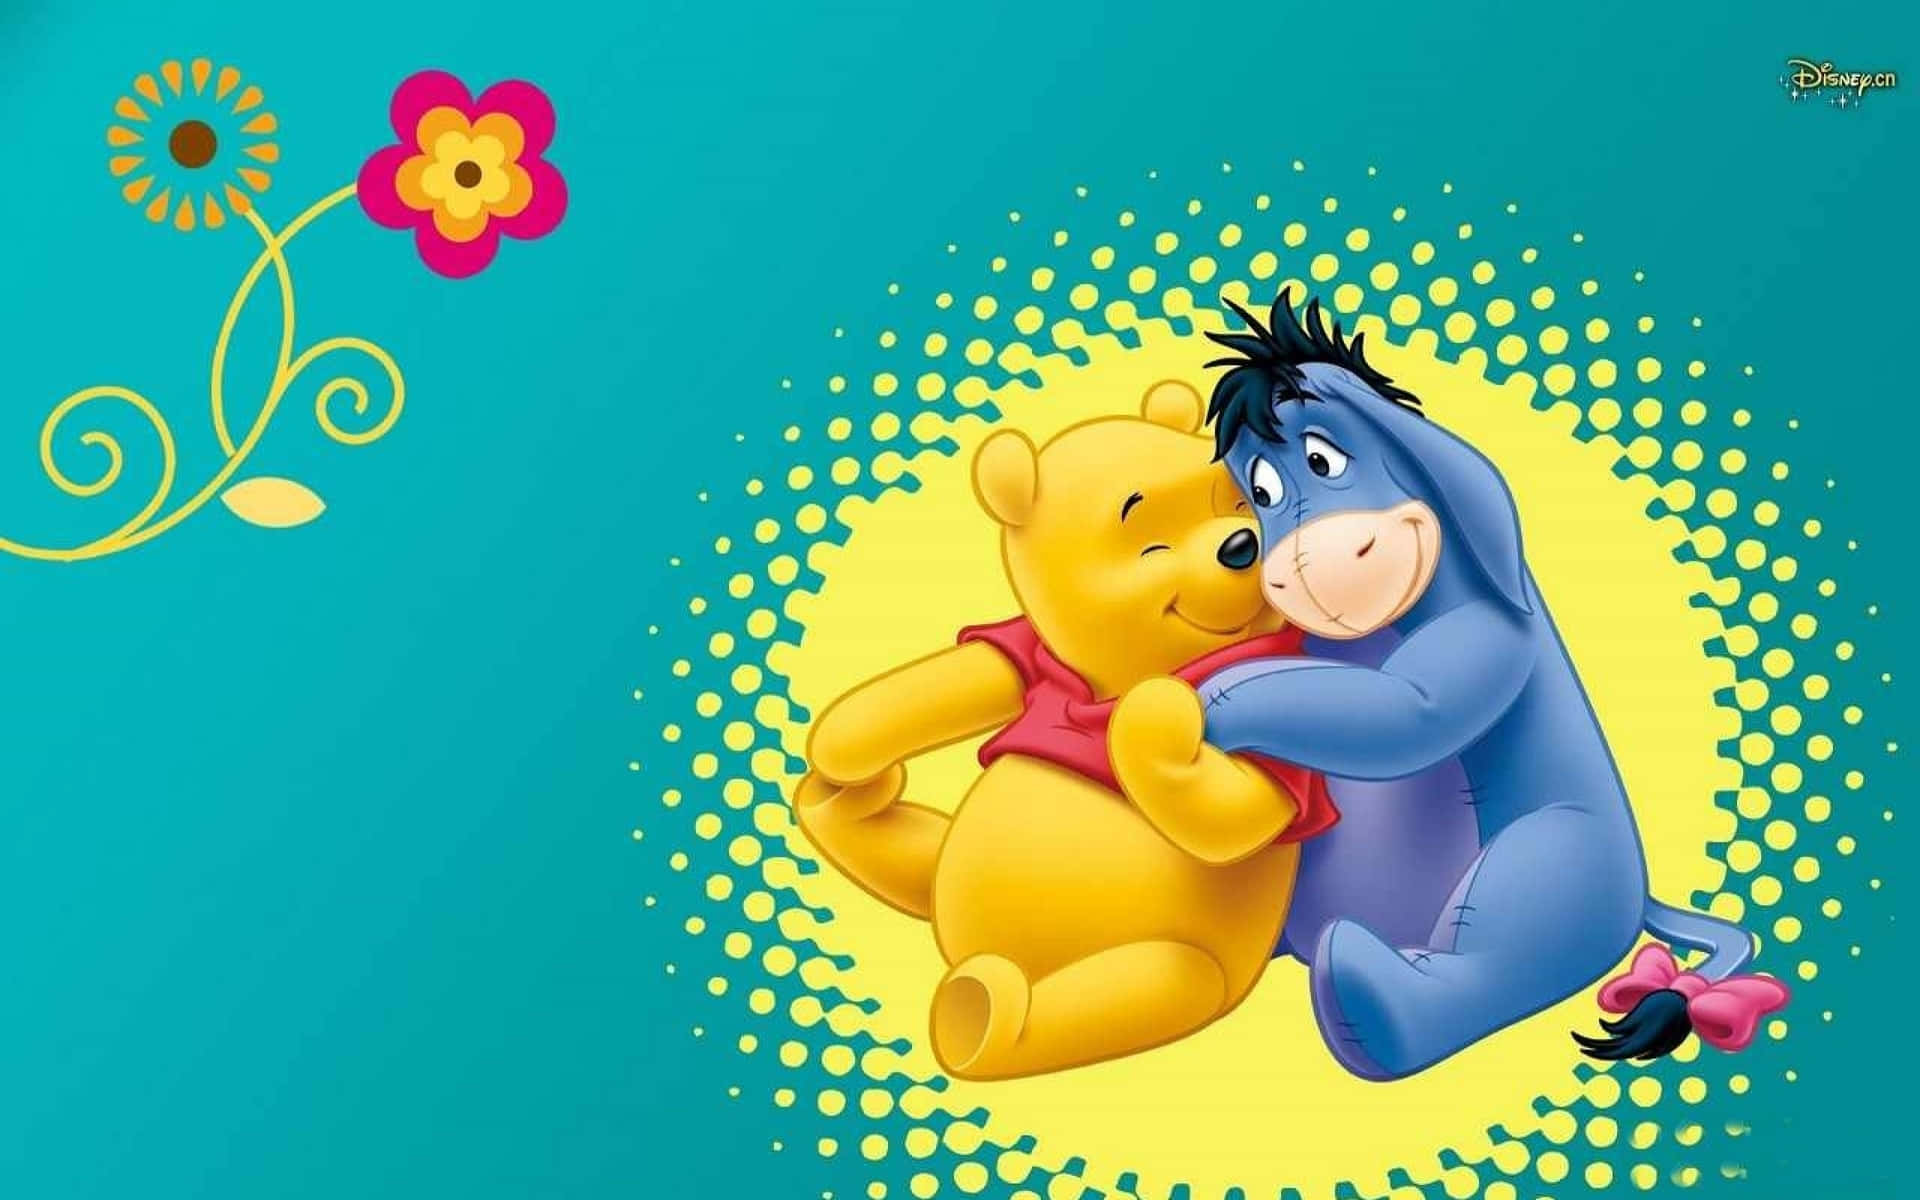 Enjoy The Magical World Of Winnie The Pooh On Your Desktop Background